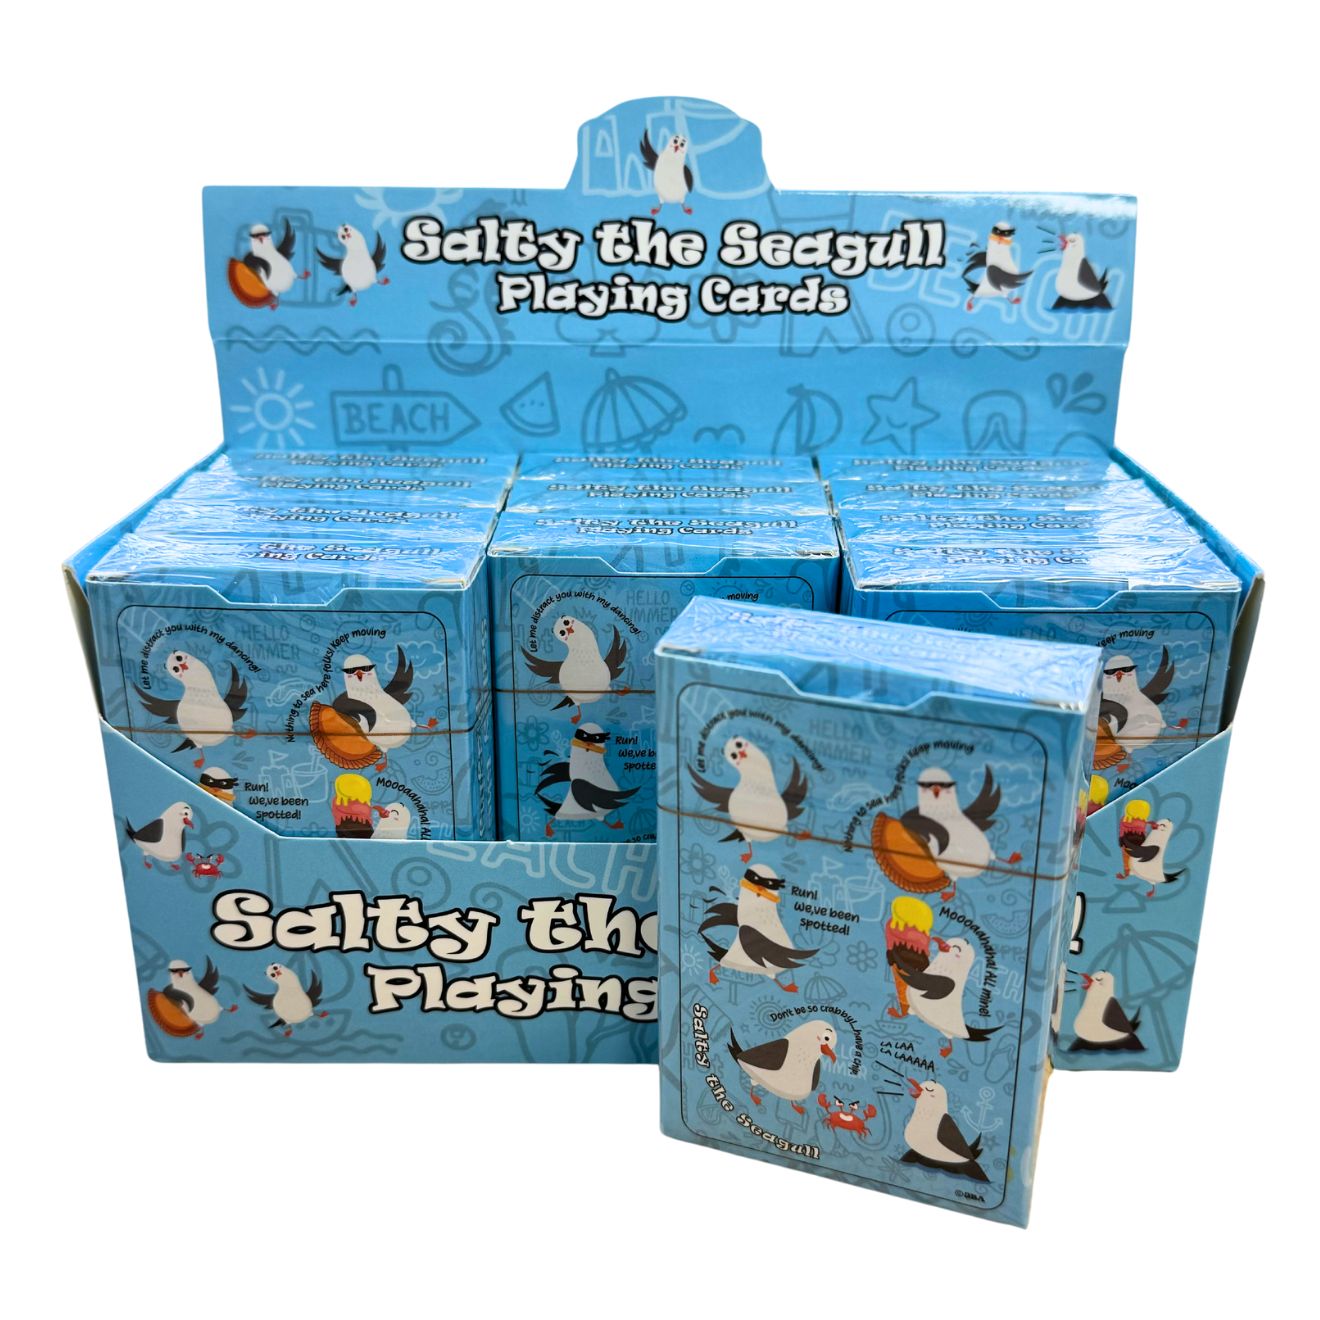 Salty the Seagull Playing Cards